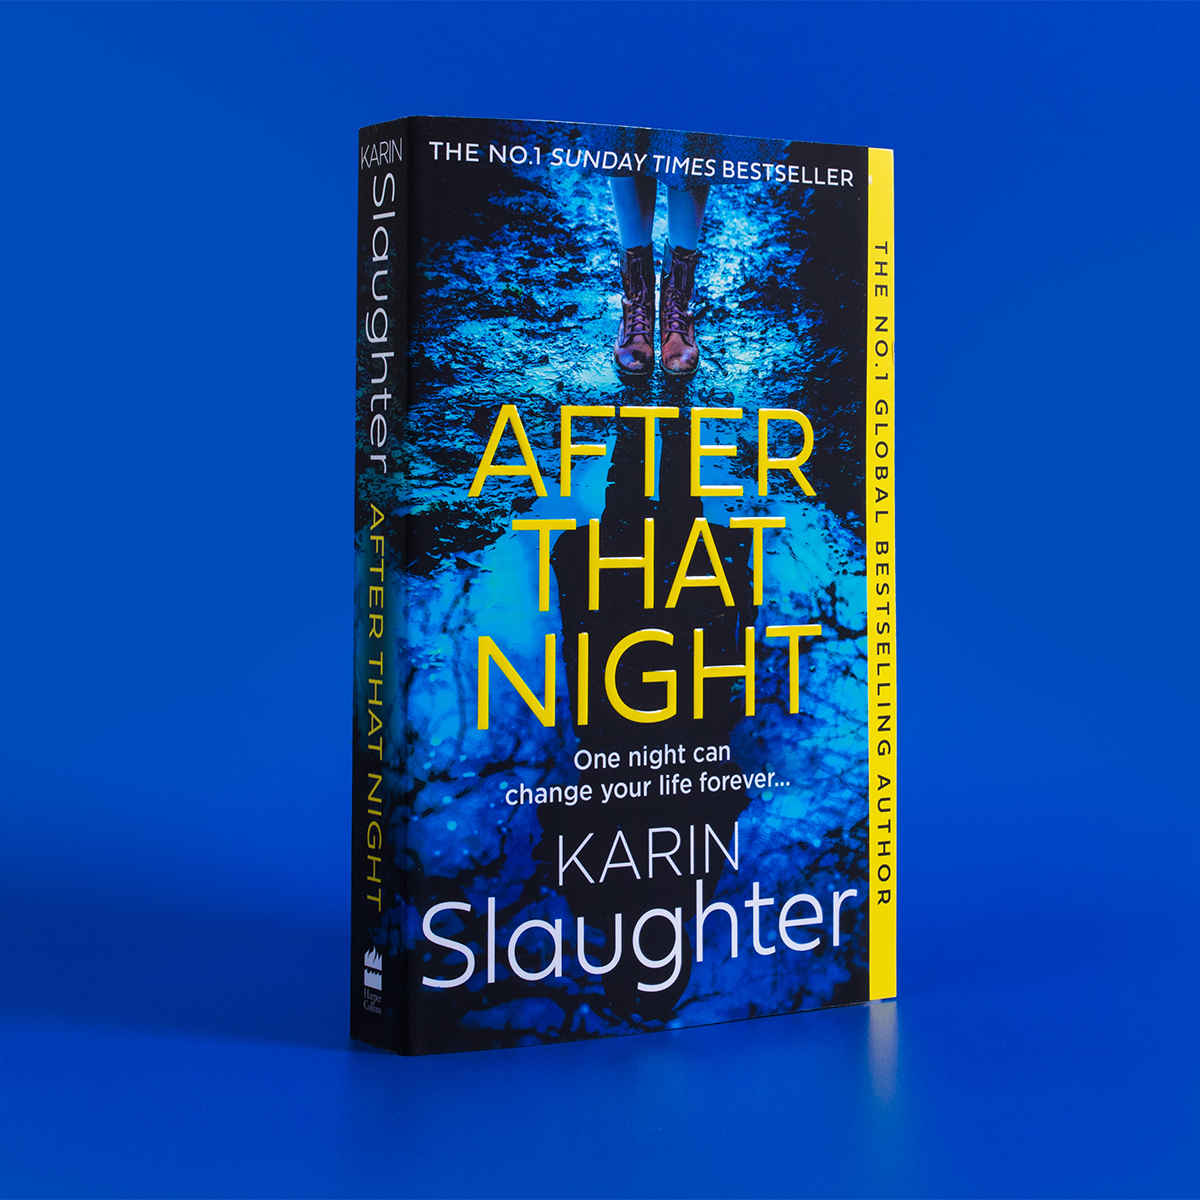 Win a Copy of After That Night by Karin Slaughter and a Papier Reading Journal